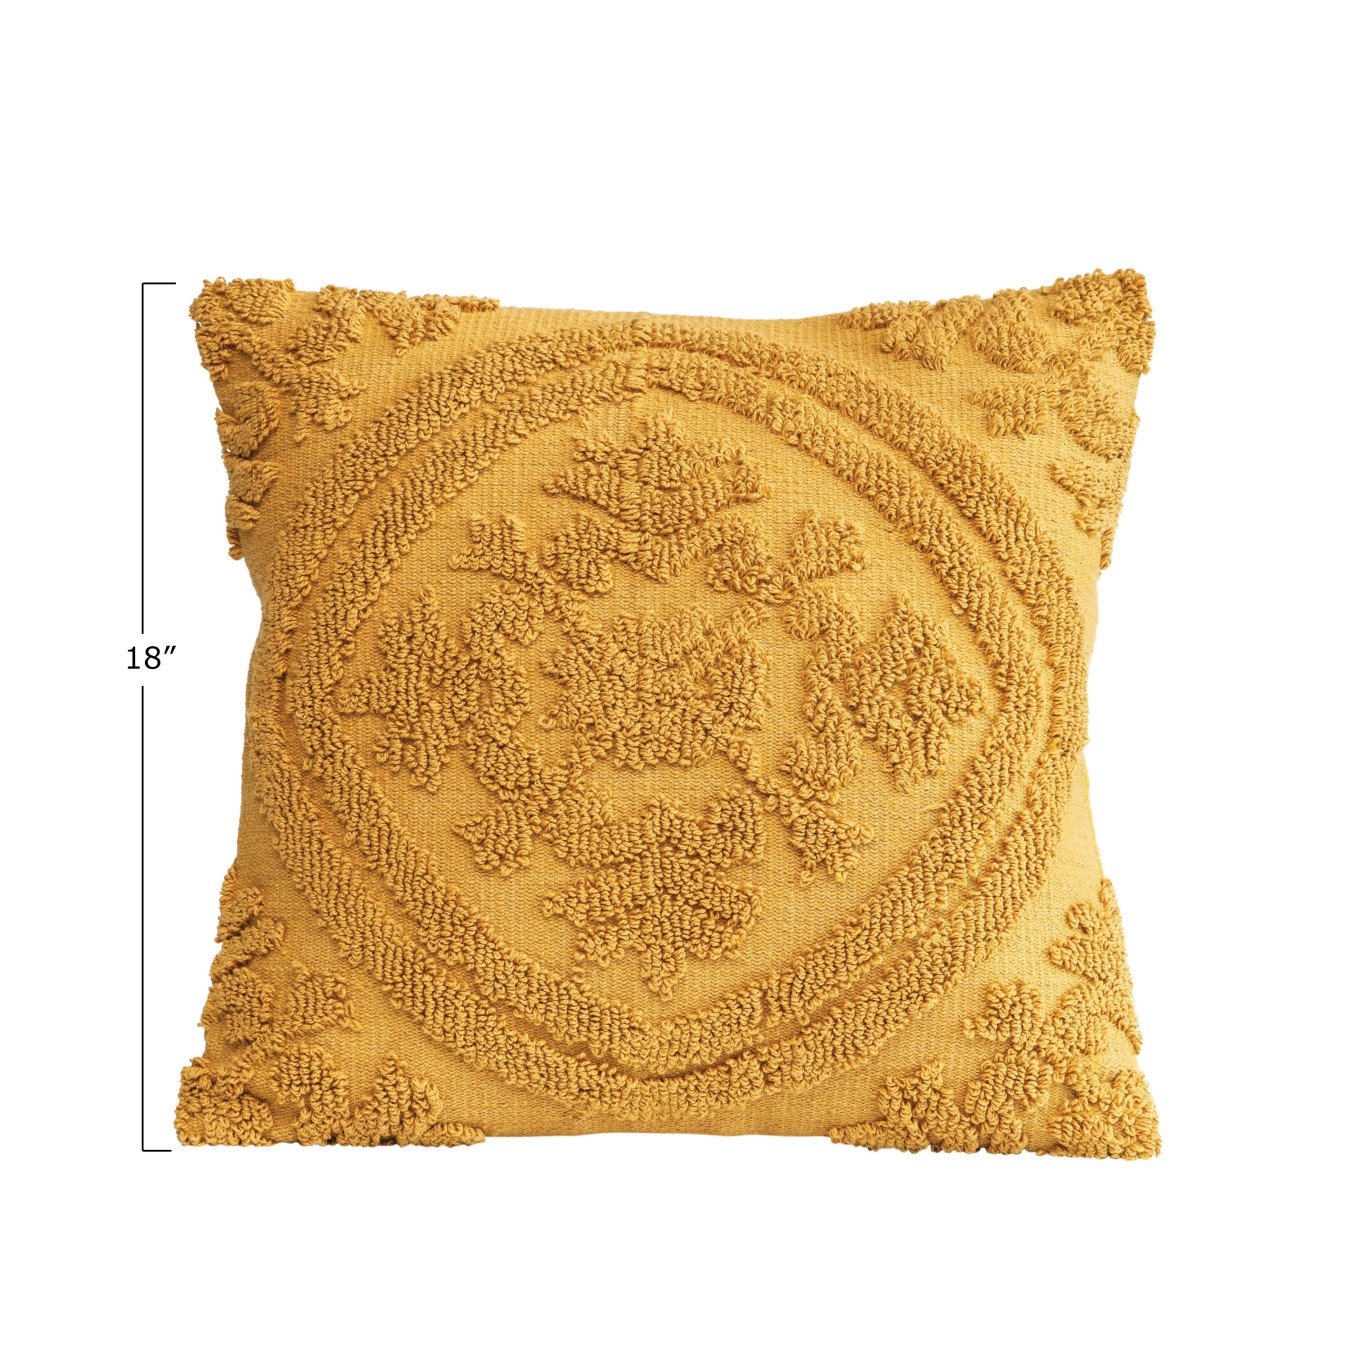 Square Woven Looped Pillow, Mustard Cotton, 18" x 18" - Image 1